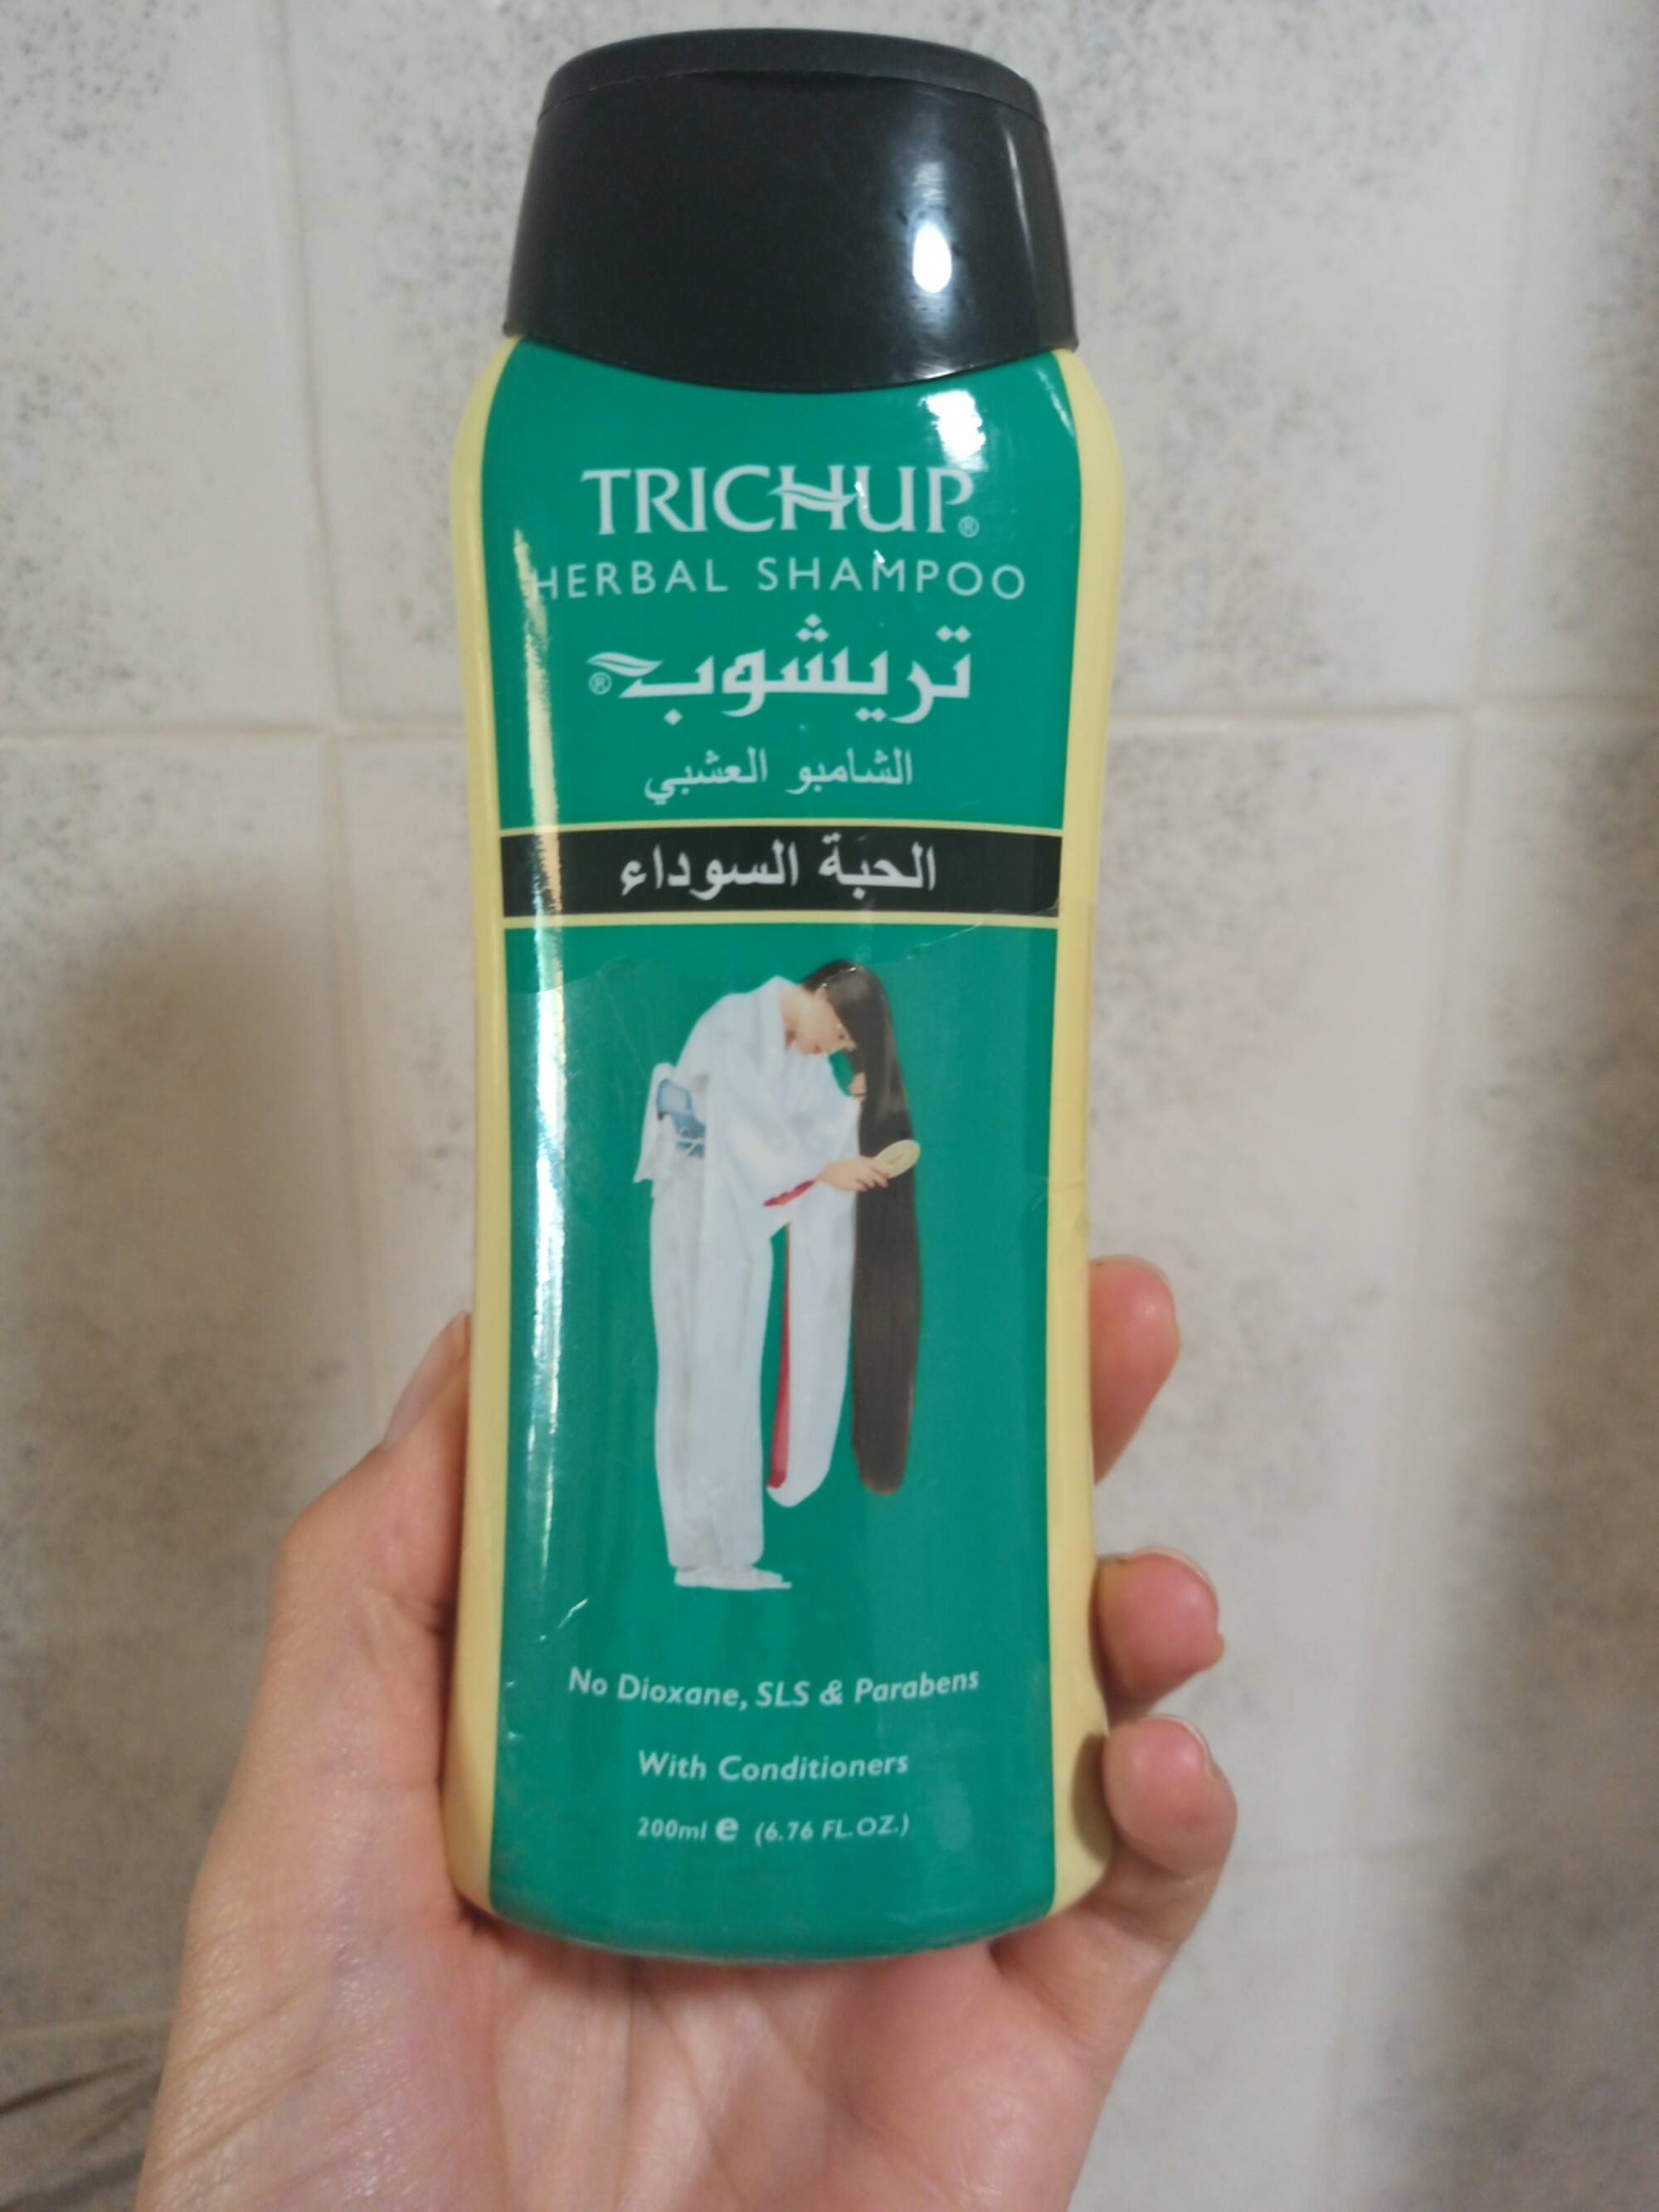 TRICHUP - Herbal shampoo with conditioners